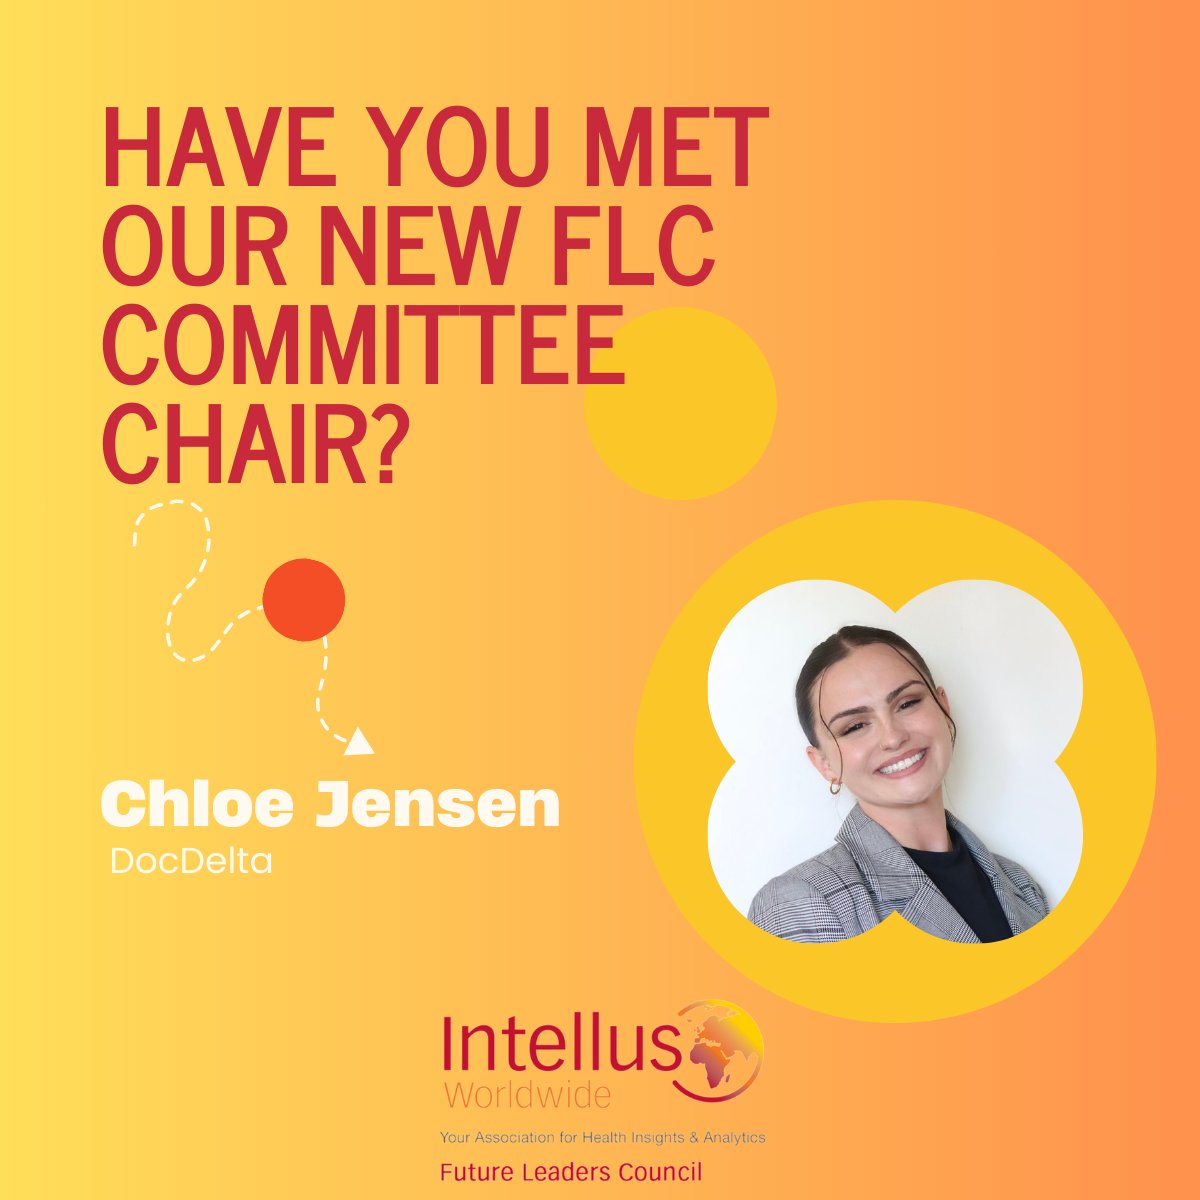 If you're new to the health insights industry or seeking to engage with the #IntellusWW Future Leaders Council, reach out to Chloe Jensen at chloe@docdelta.com #Intellus2024 #HealthcareInsights #YoungProfessionals #FutureLeadersCouncil